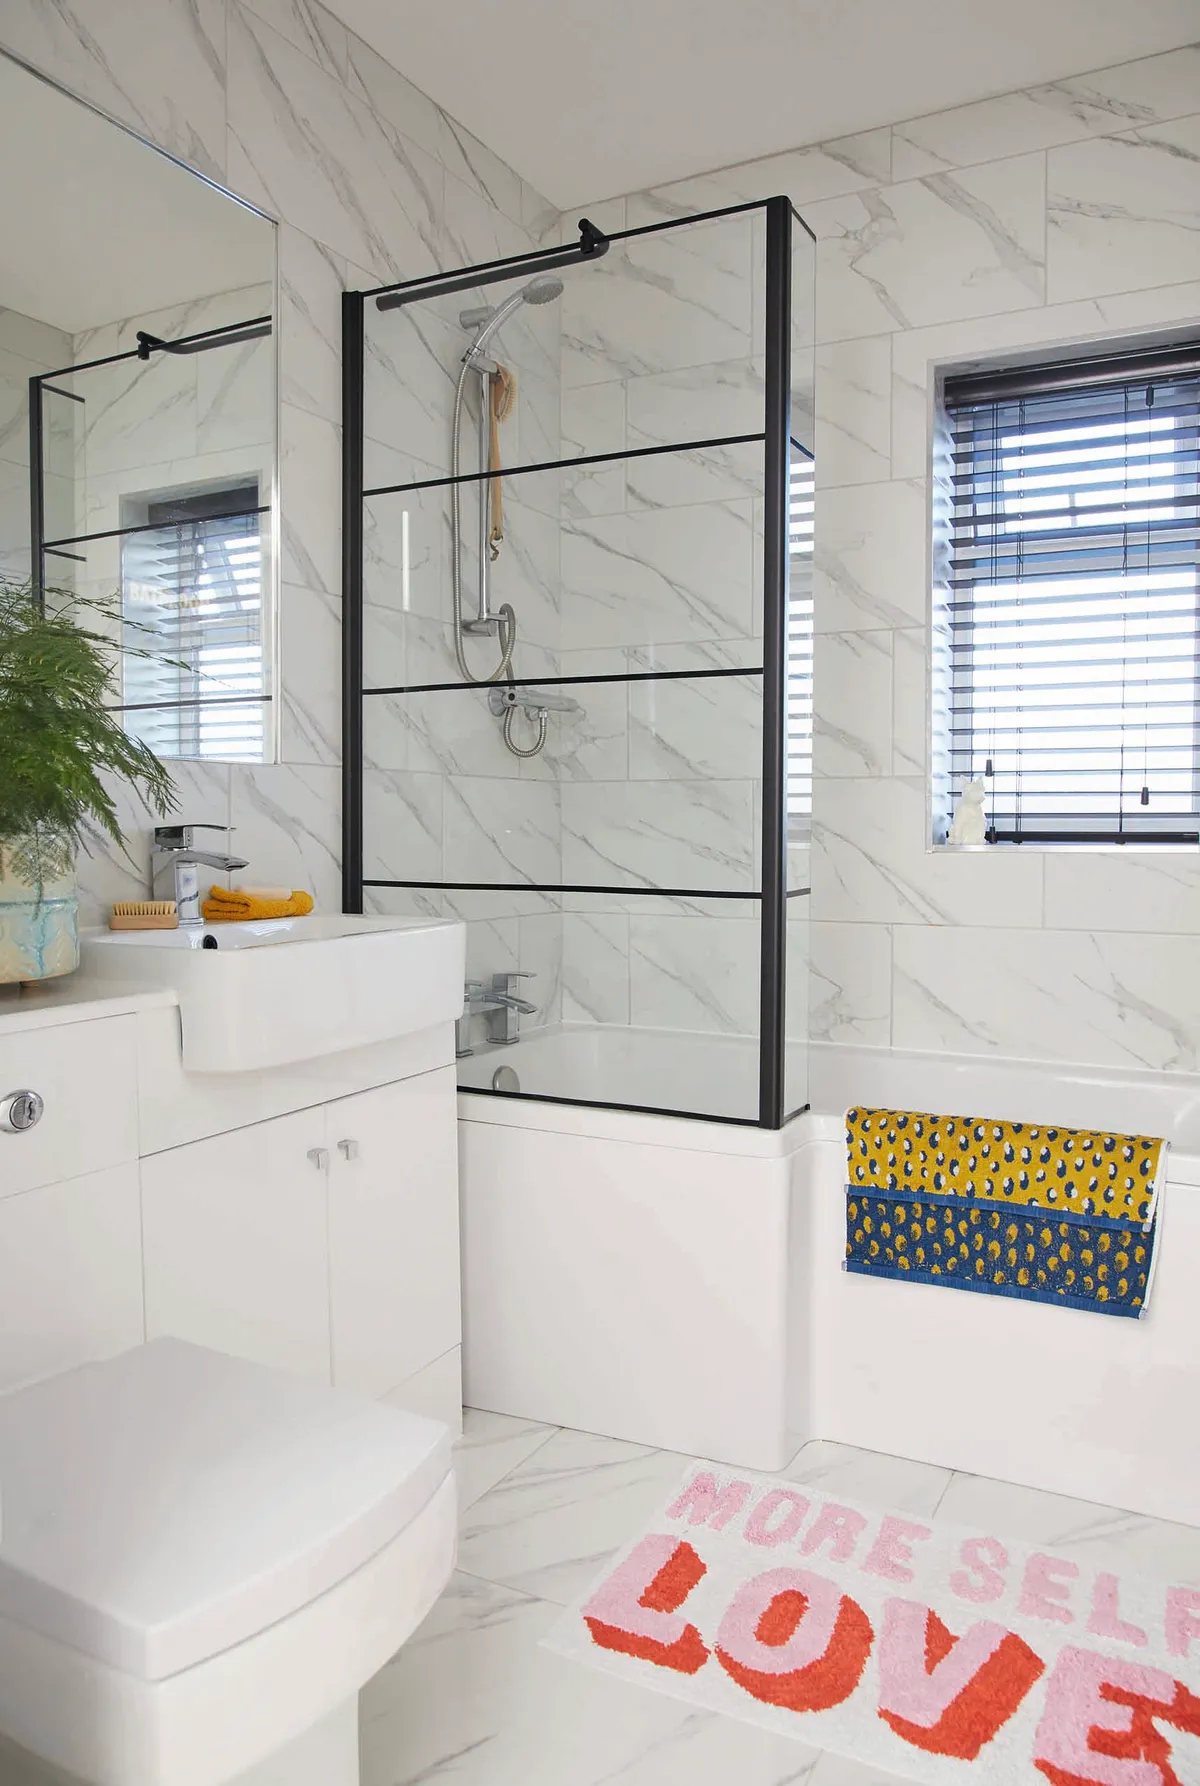 This all-white bathroom isn’t what I would choose, but it’s easy to add a bit of colour using these yellow and blue towels from George Home and the fun bath mat from Urban Outfitters